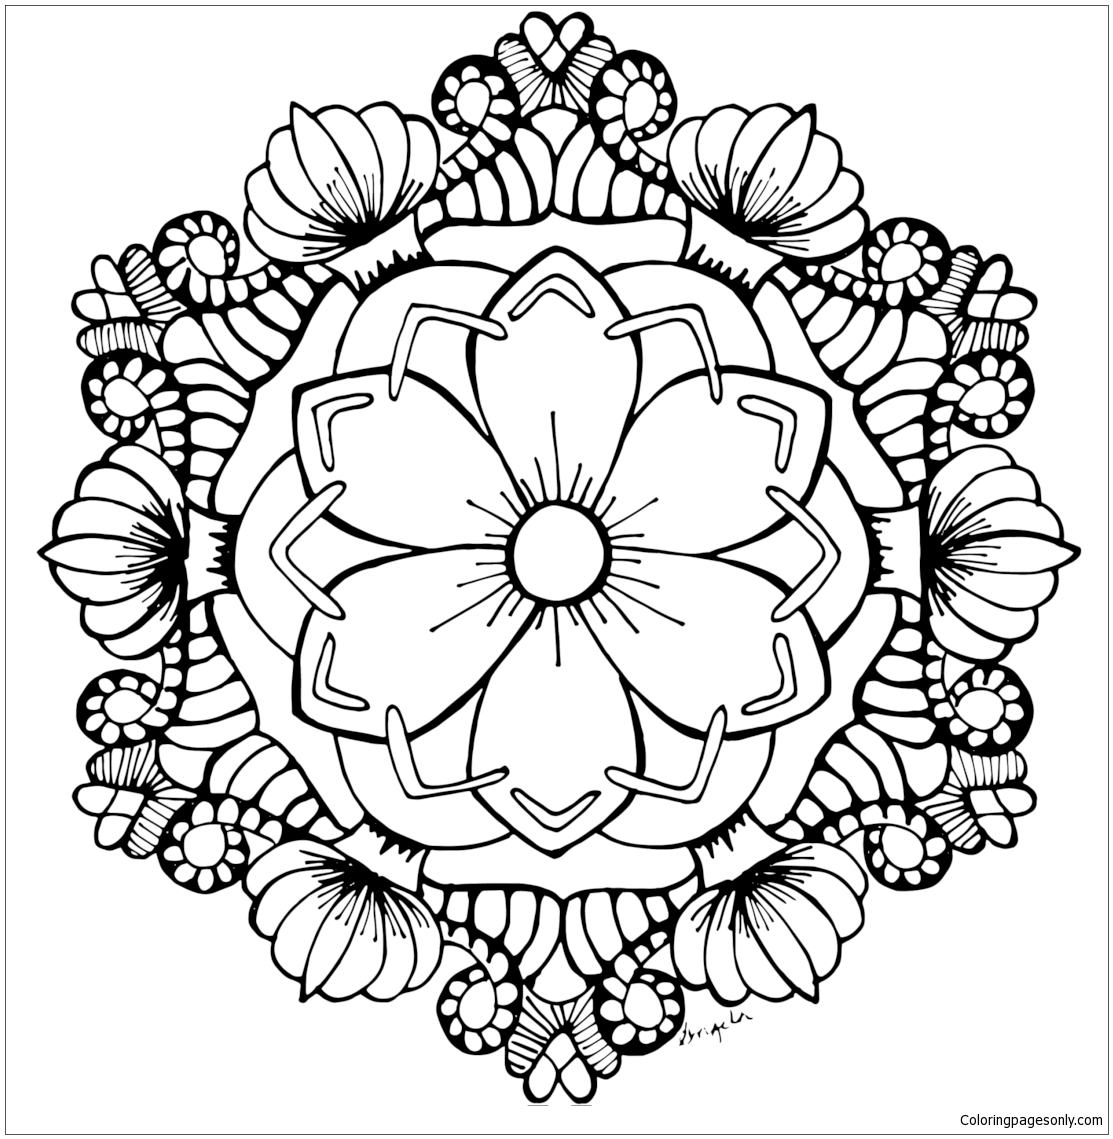 Mandala August Flower Garden Coloring Pages